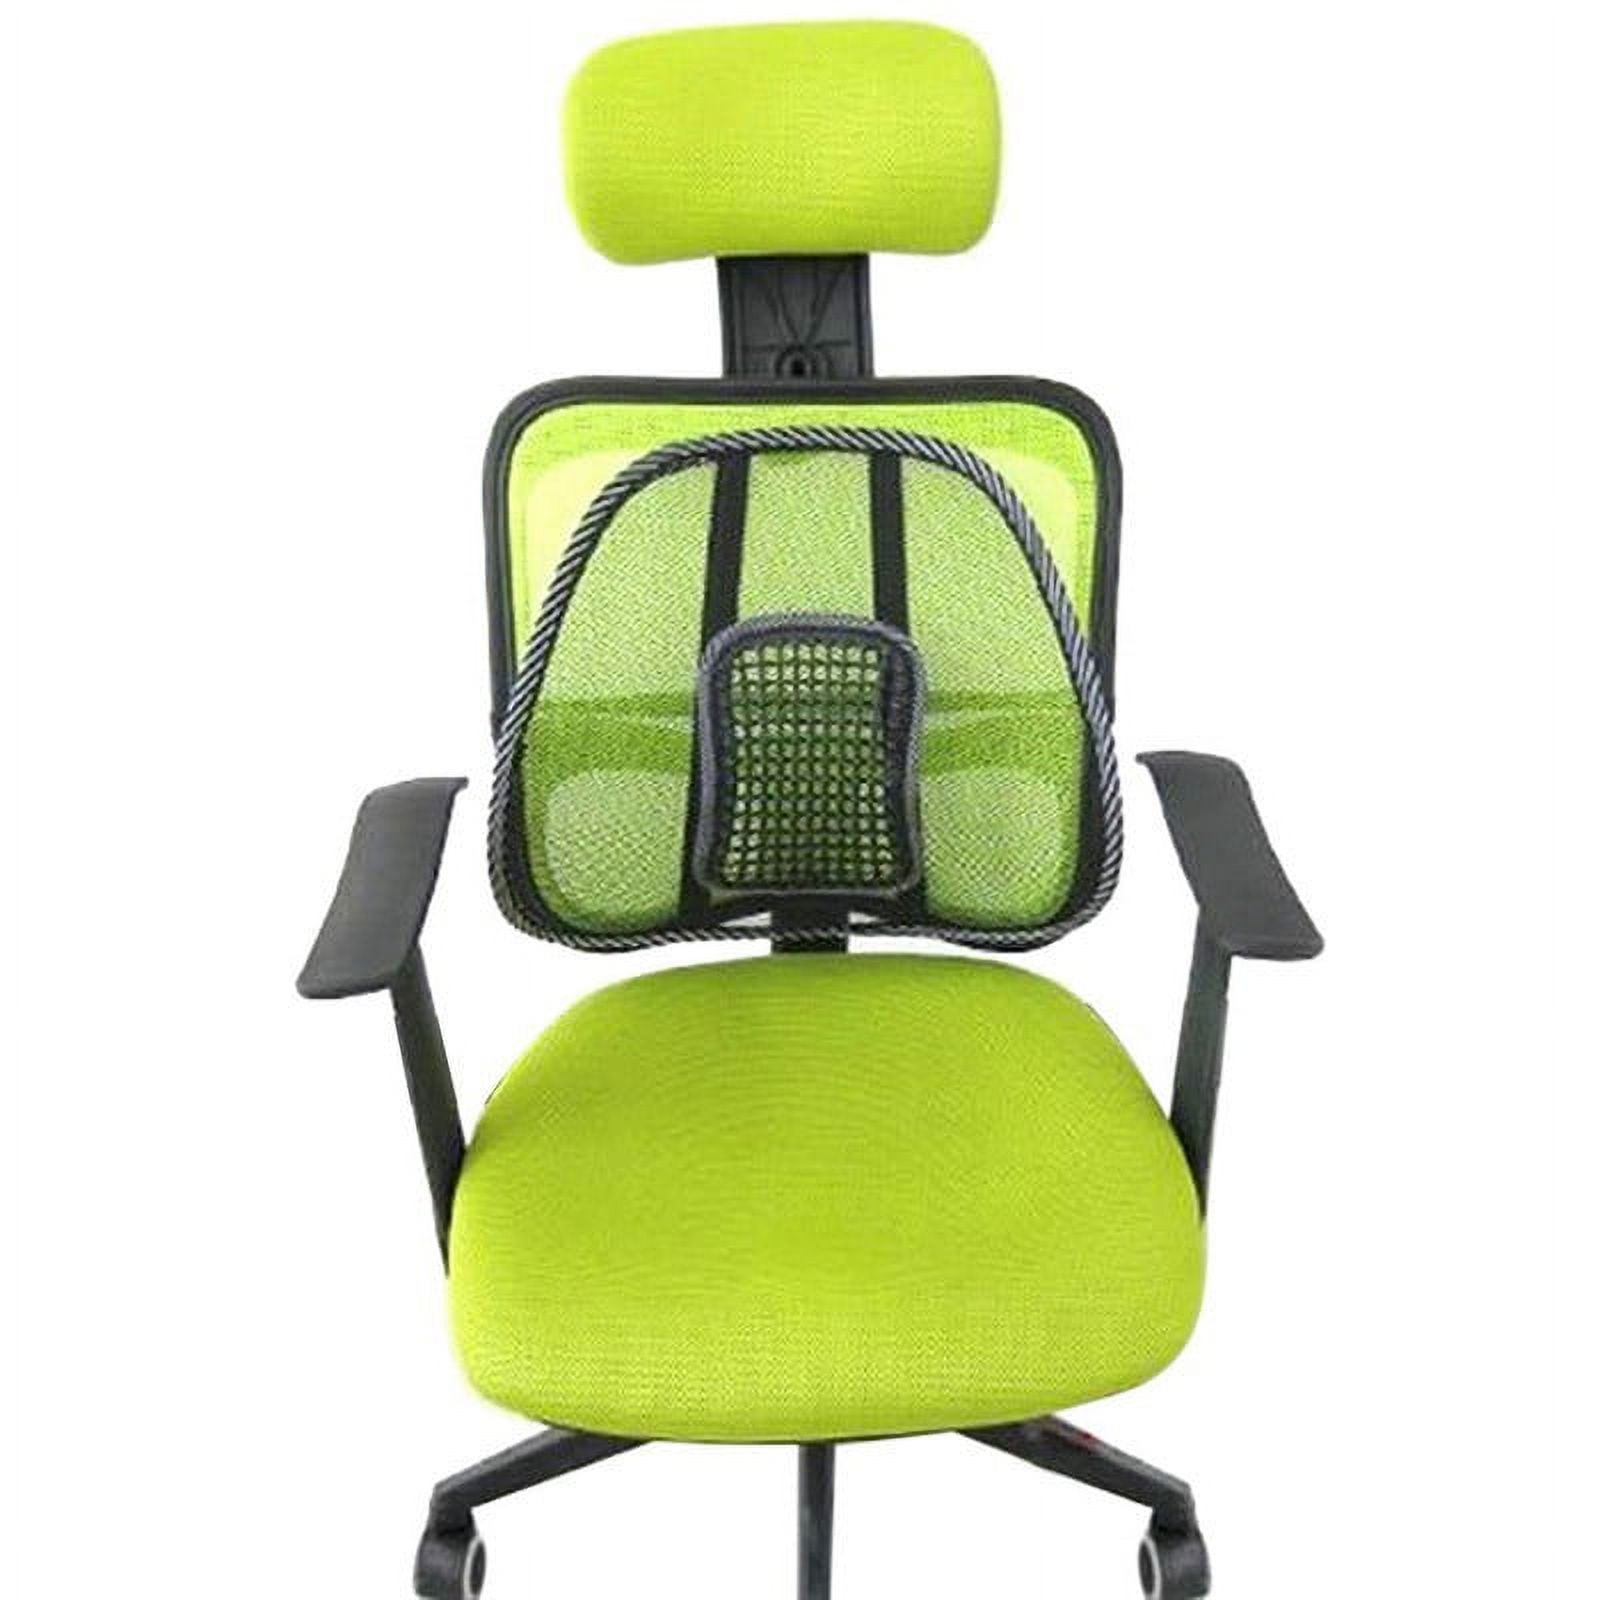 Car Seat Office Chair Massage Back Brace Lumbar Support Ventilate Cushion  Pad Black Mesh Cushion for Car Driver Home Breathable